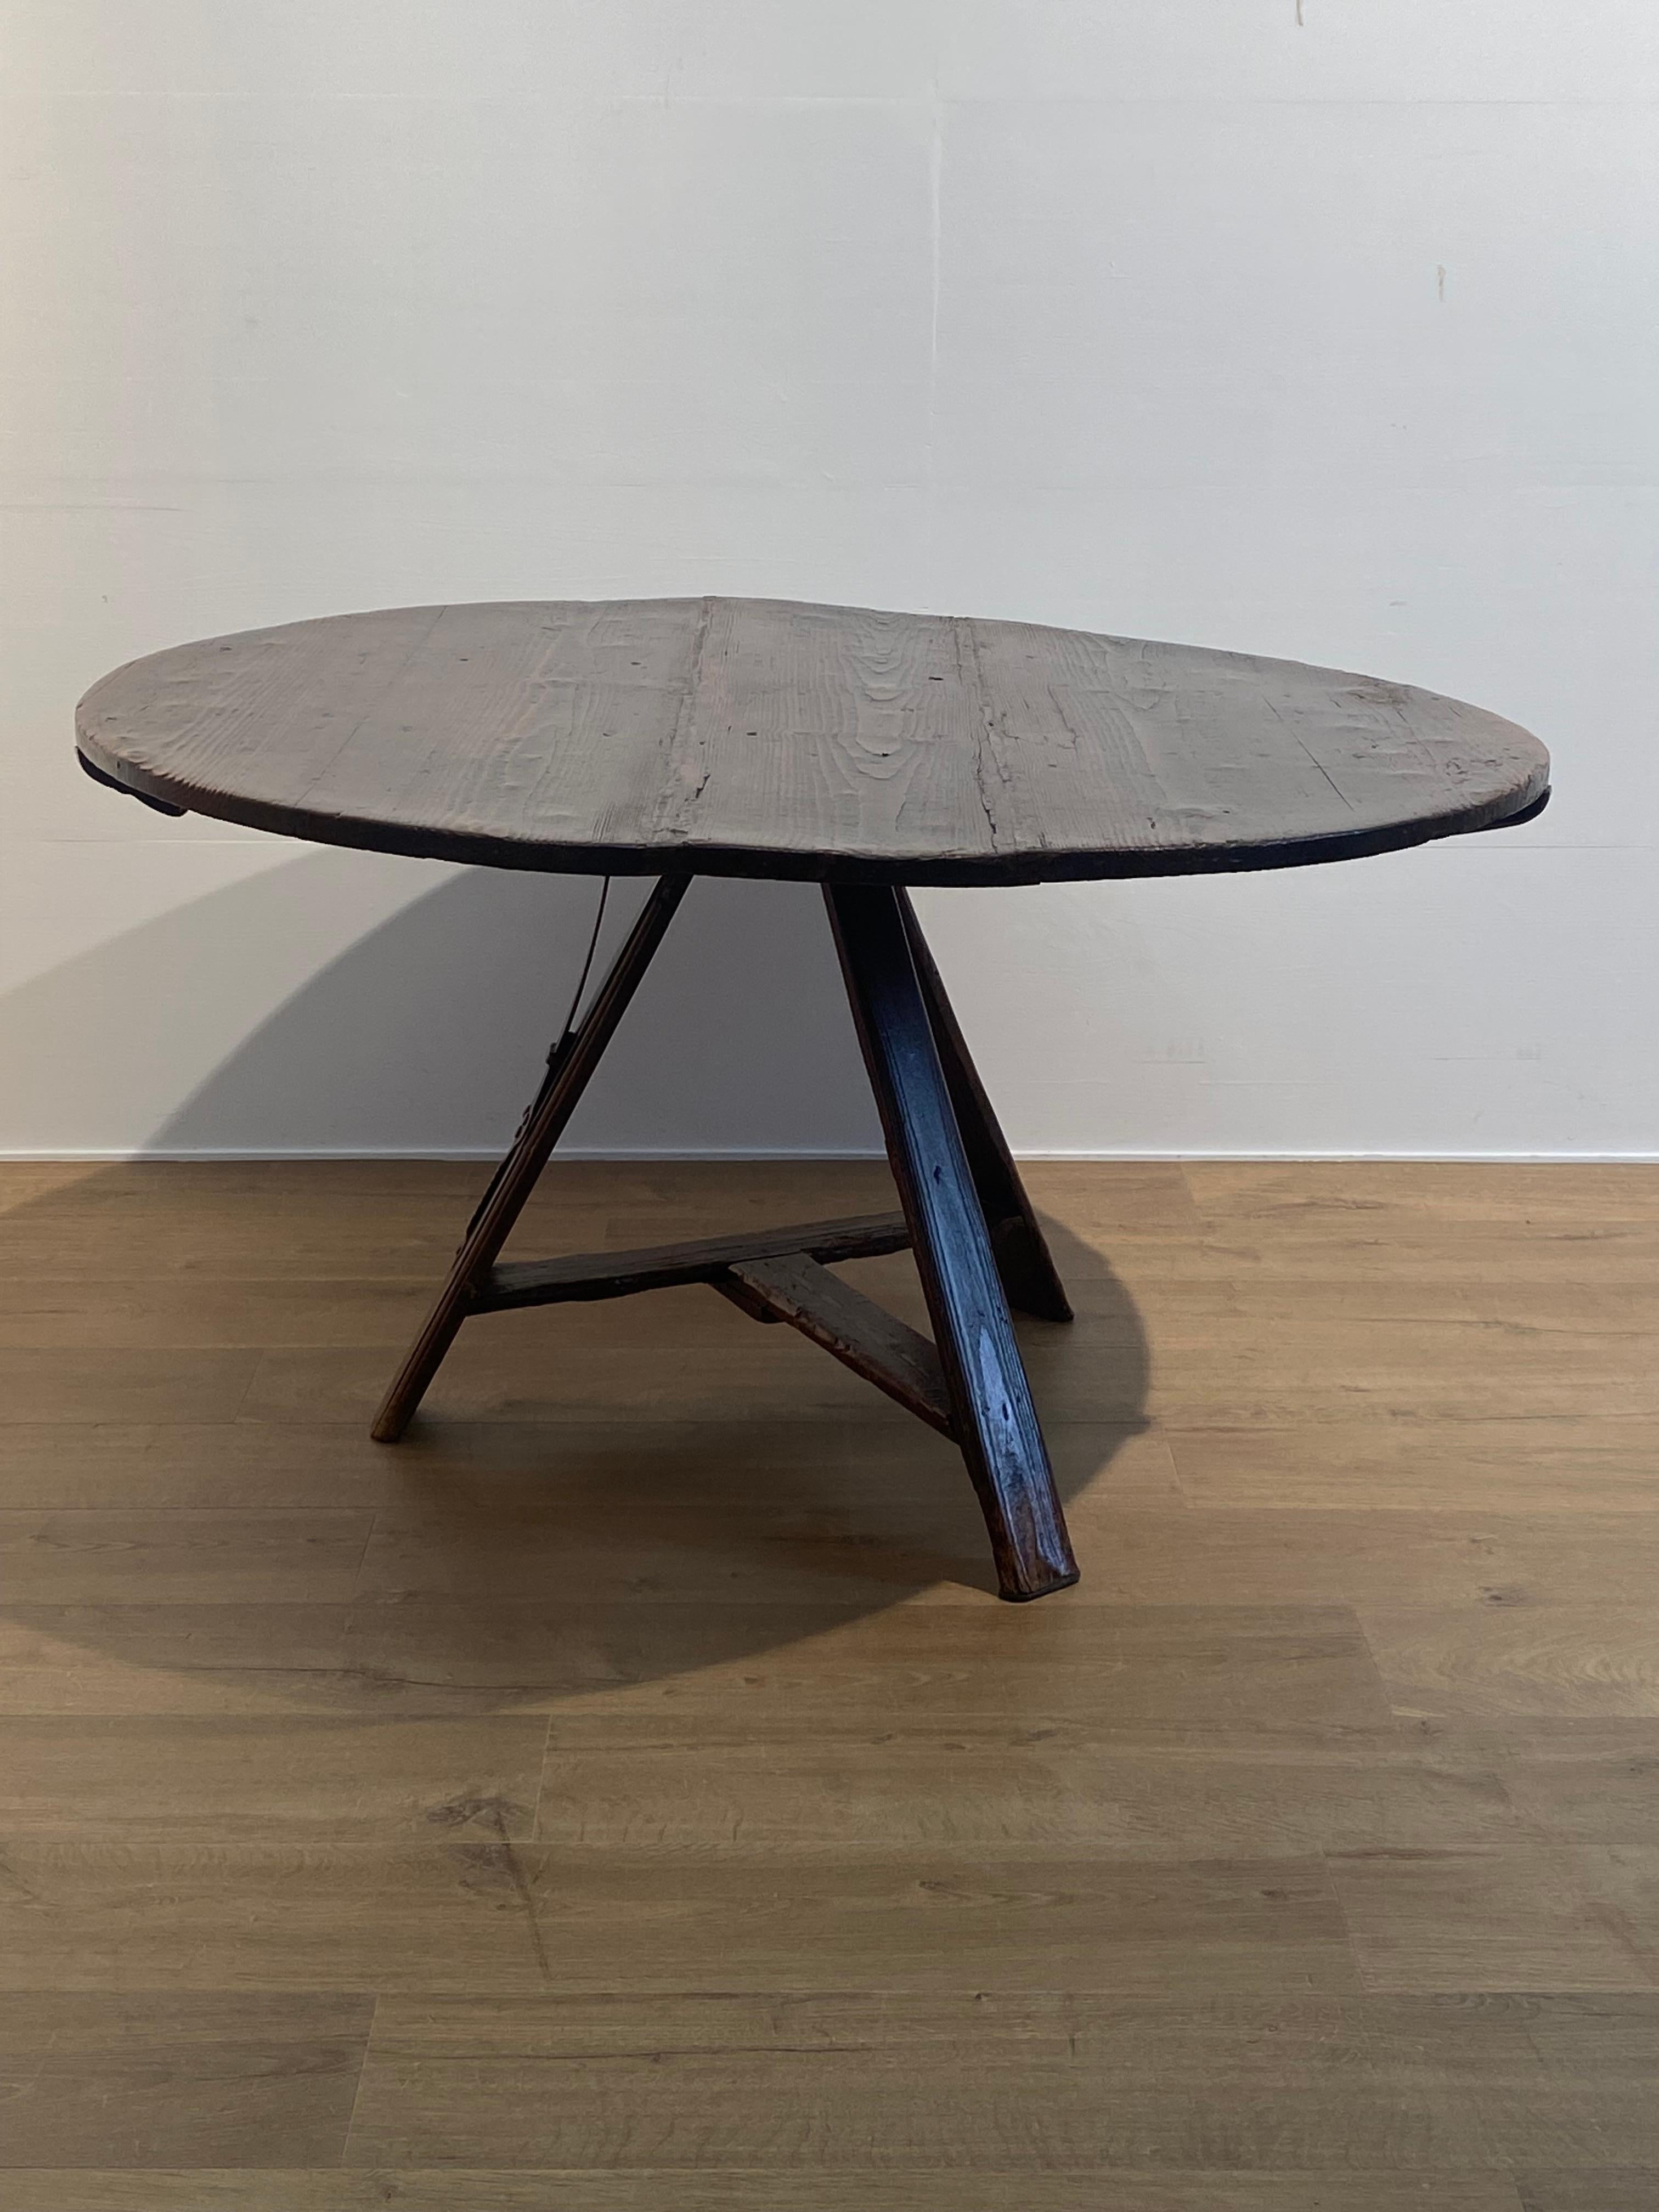 Elegant round and antique Farmers Table,
from the Drente regio, foldable table on a central tripod,
good,old and warm patina of the wood,
to be used for different purposes,
round table with a lot of character